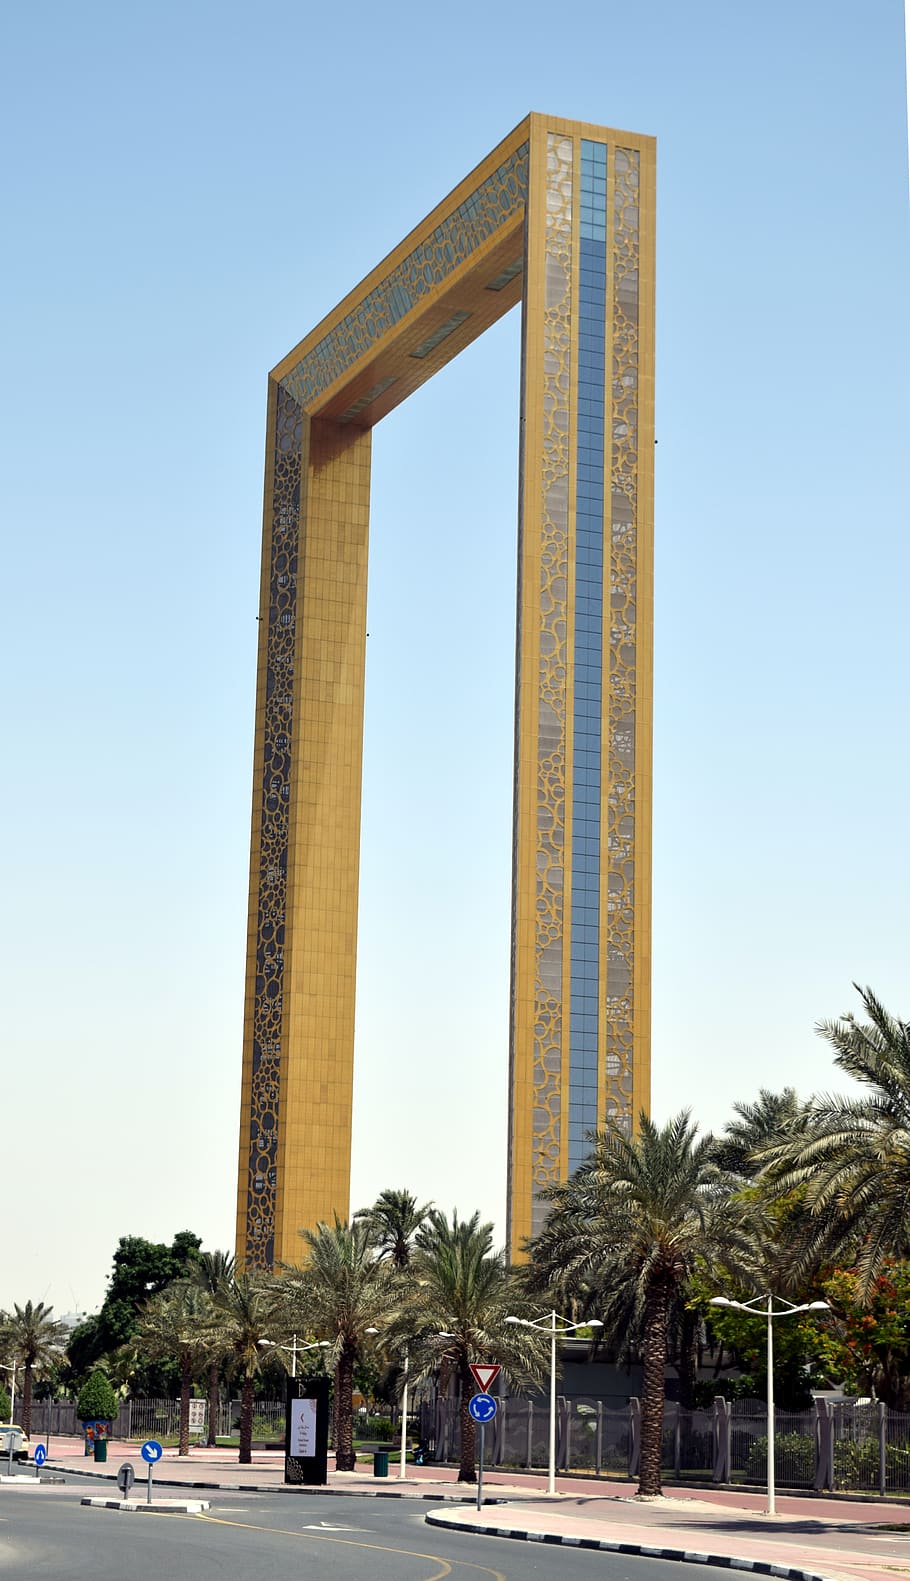 dubai, picture frame, museum, luxury, modern, sky, architecture, palm tree, tree, built structure